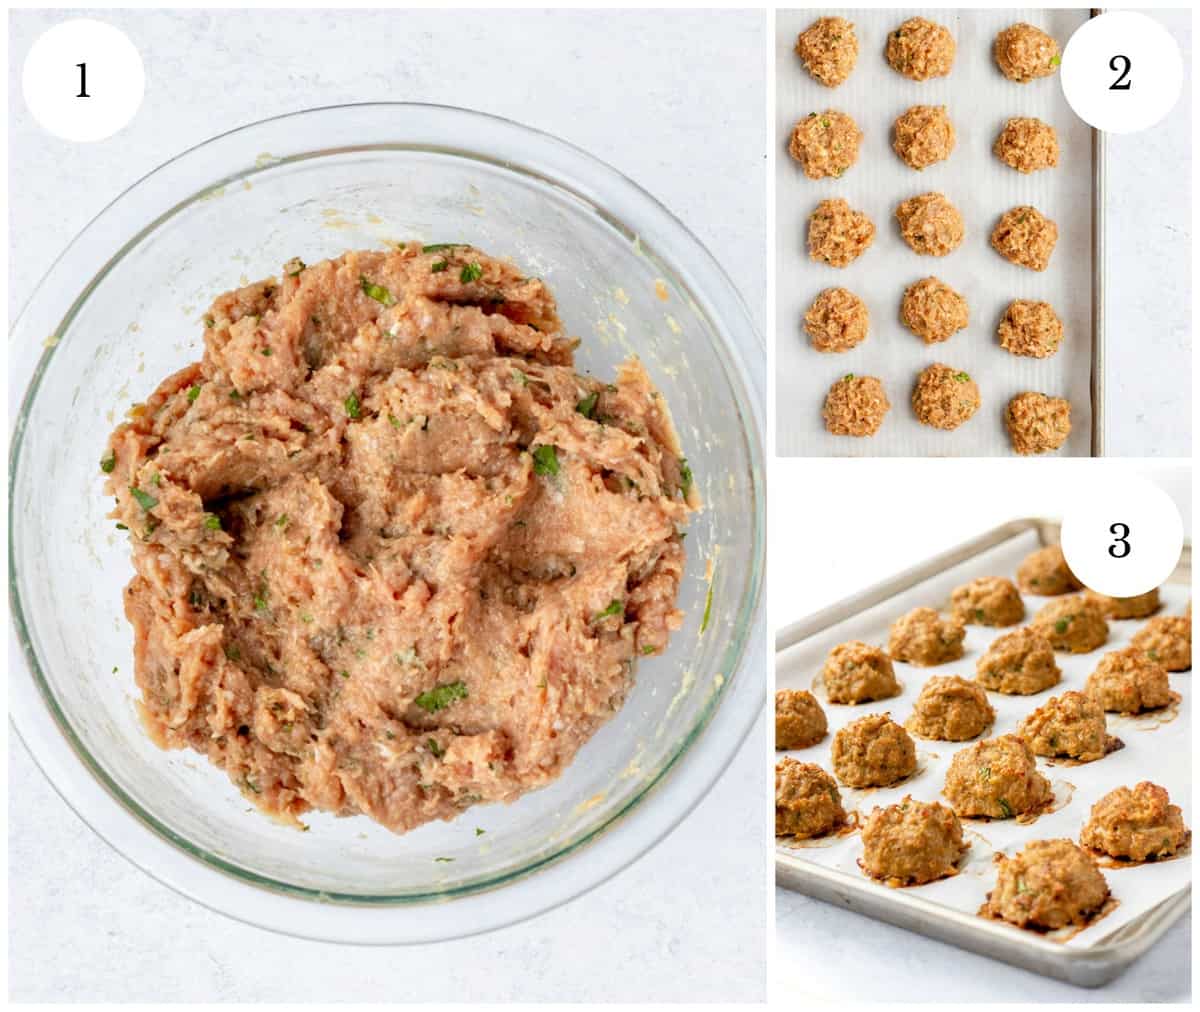 Three photos to show how to make the meatballs.